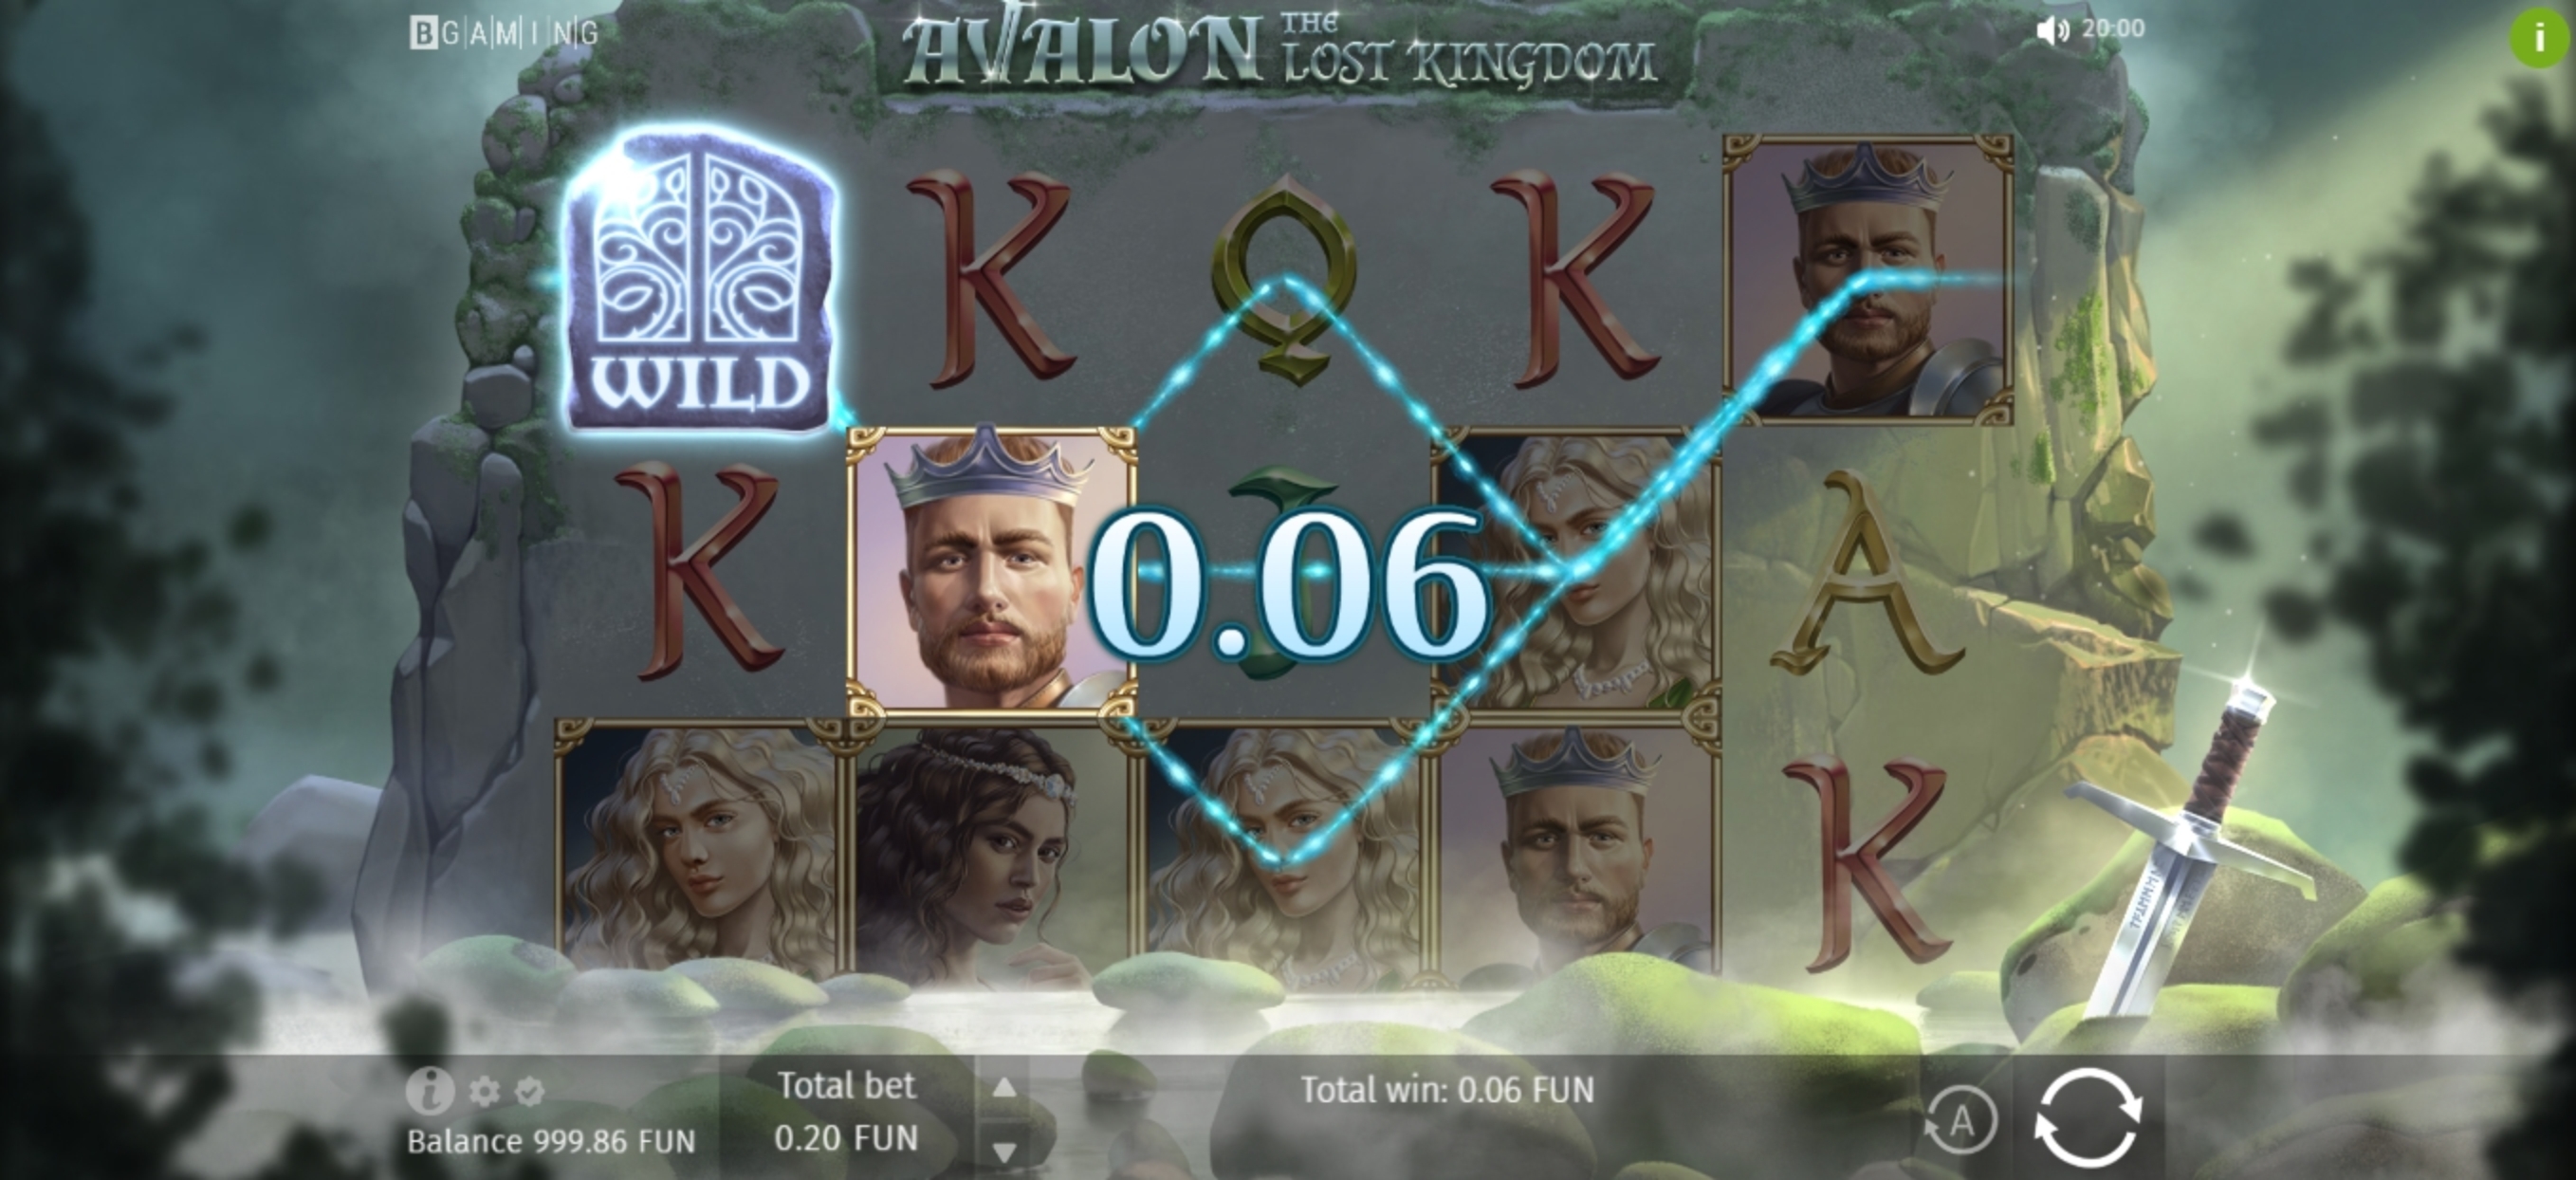 Win Money in Avalon The Lost Kingdom Free Slot Game by BGAMING